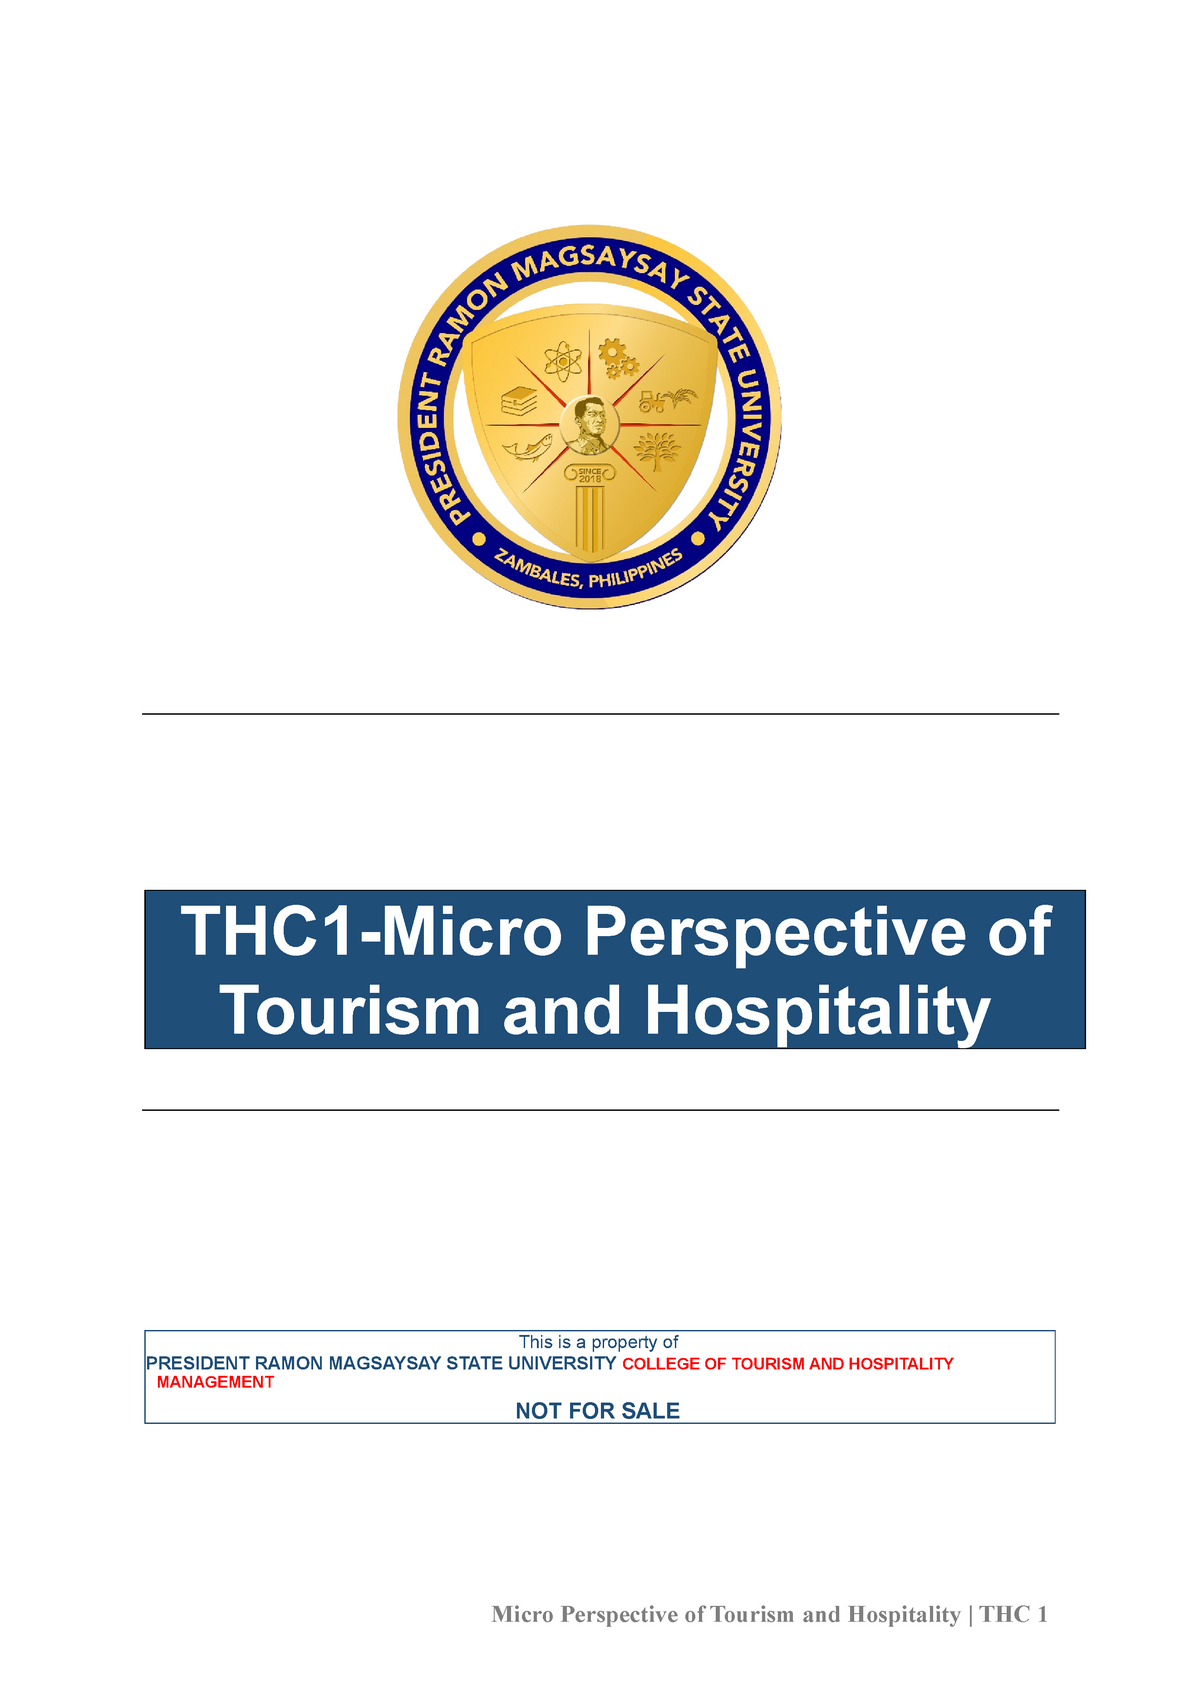 micro perspective of tourism and hospitality book pdf